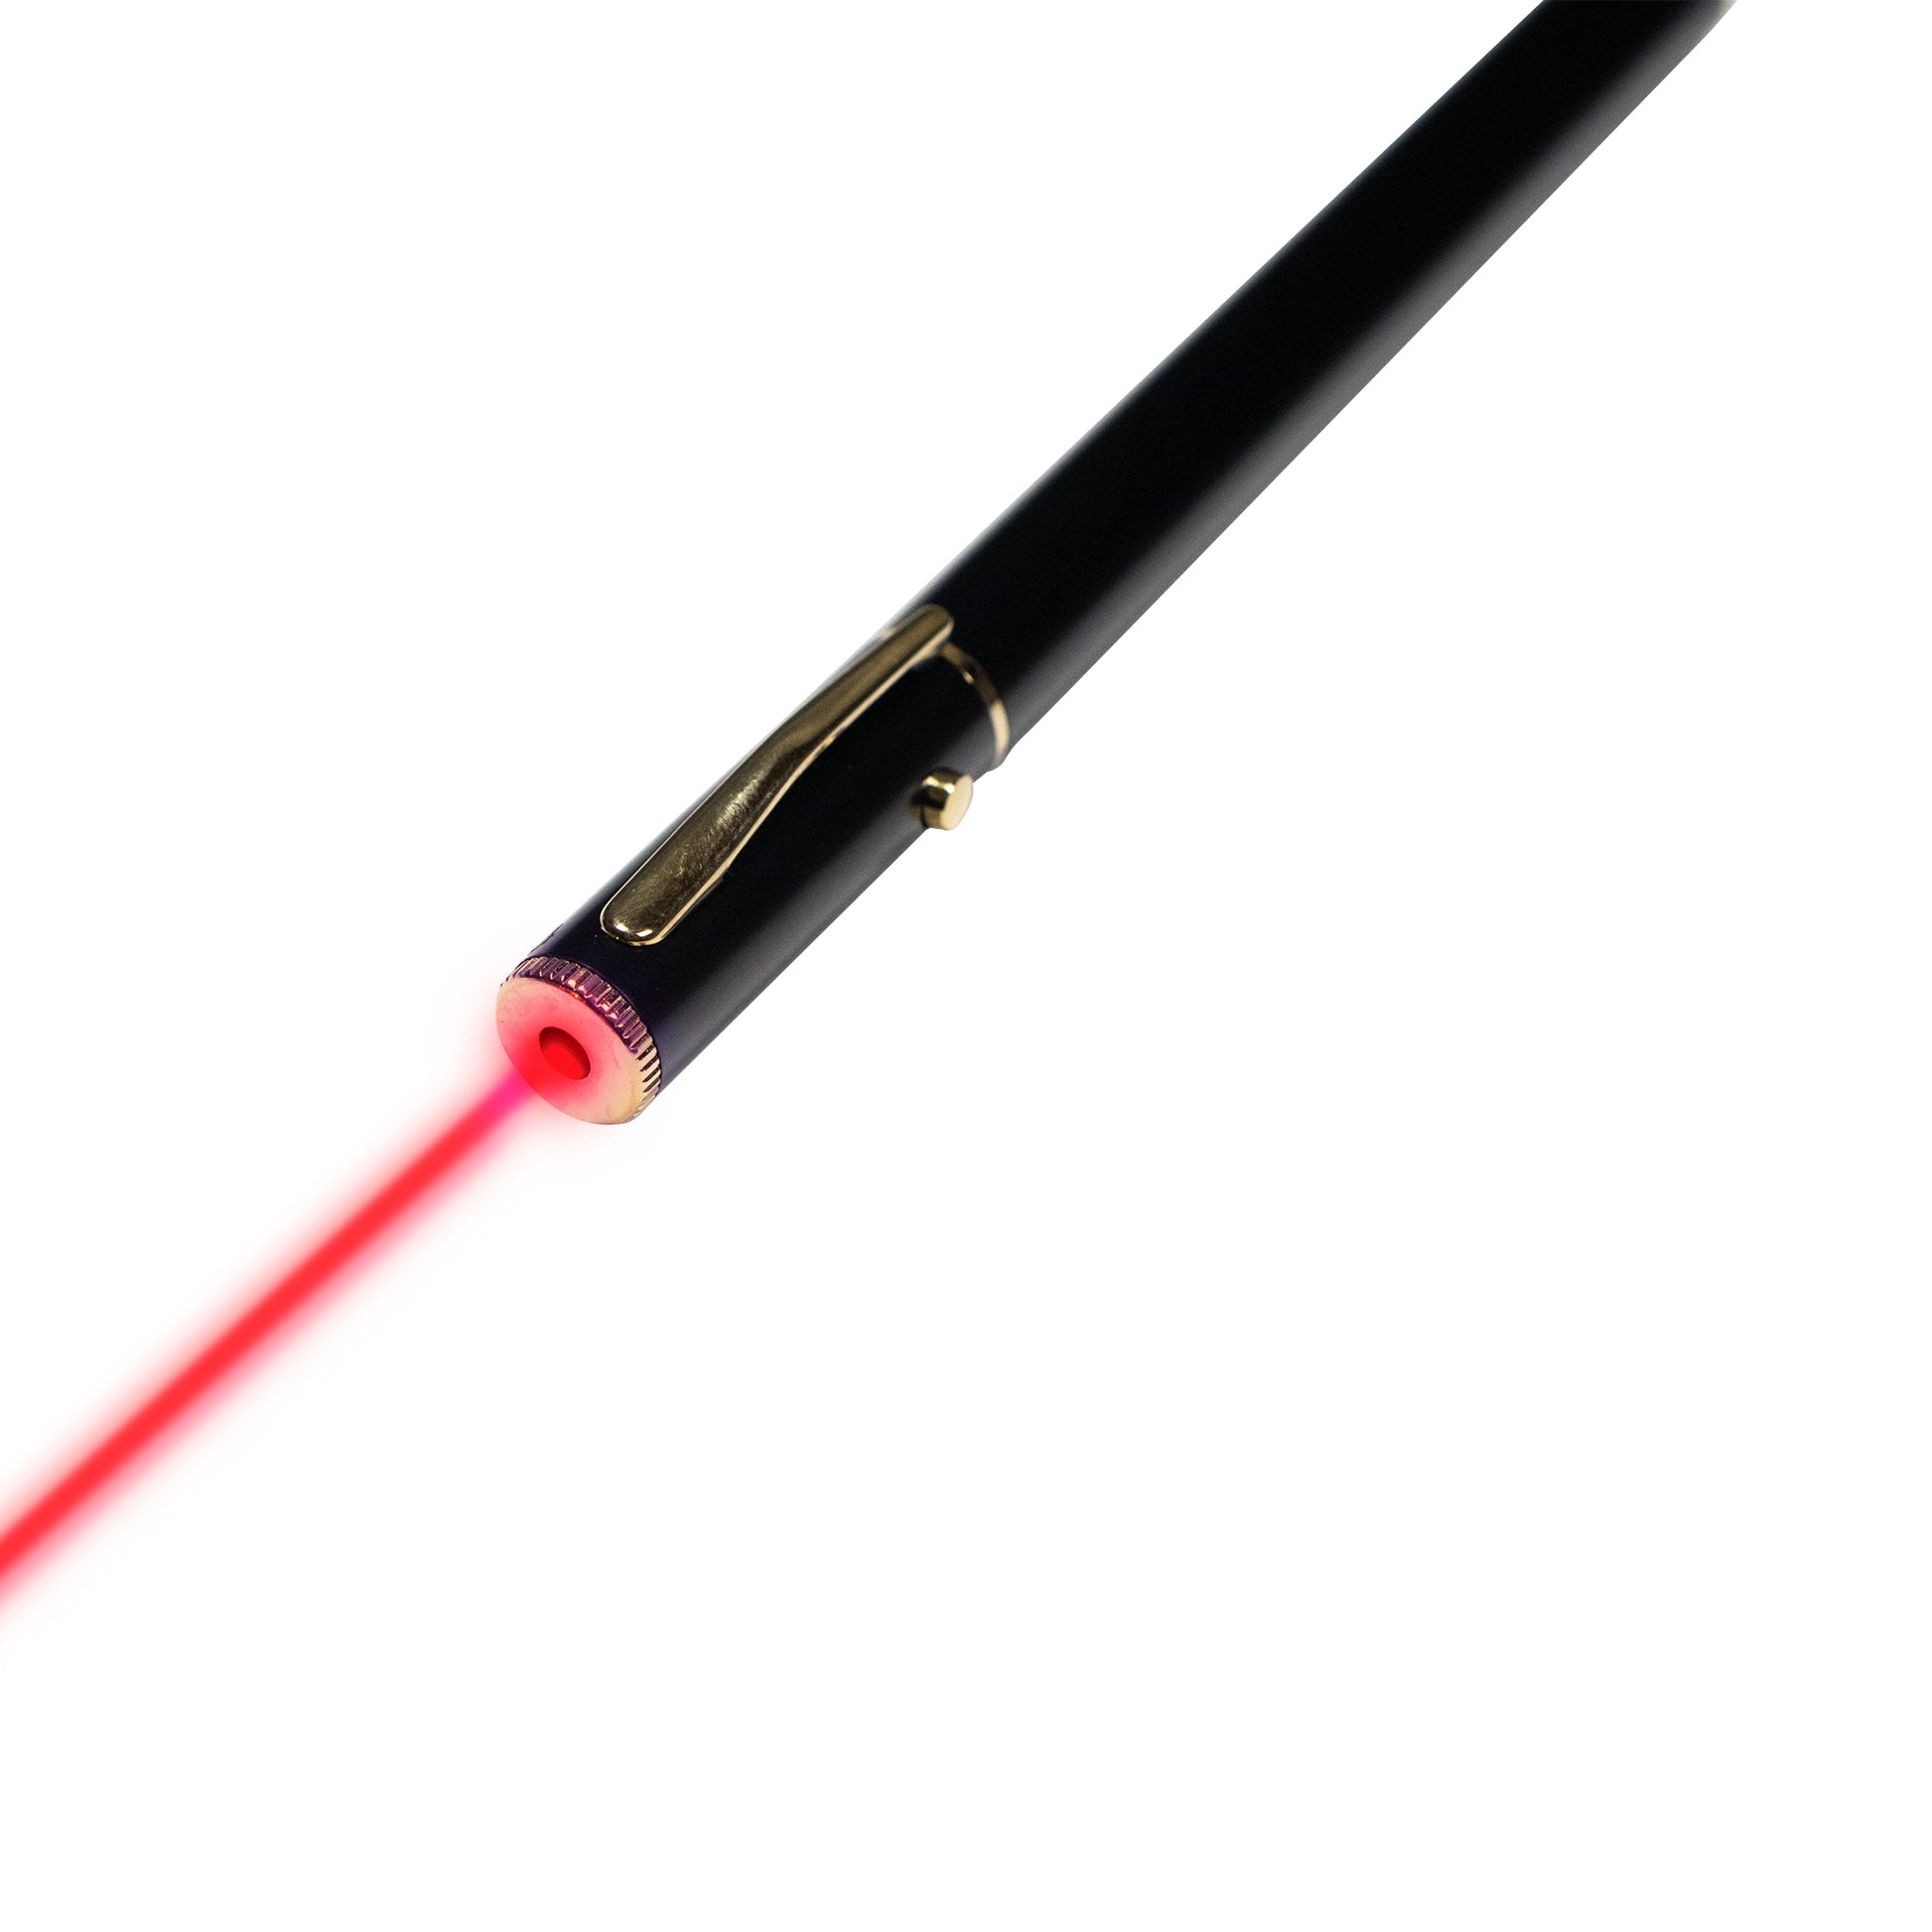 red laser beam from a black laser pointer with pen clip and gold button